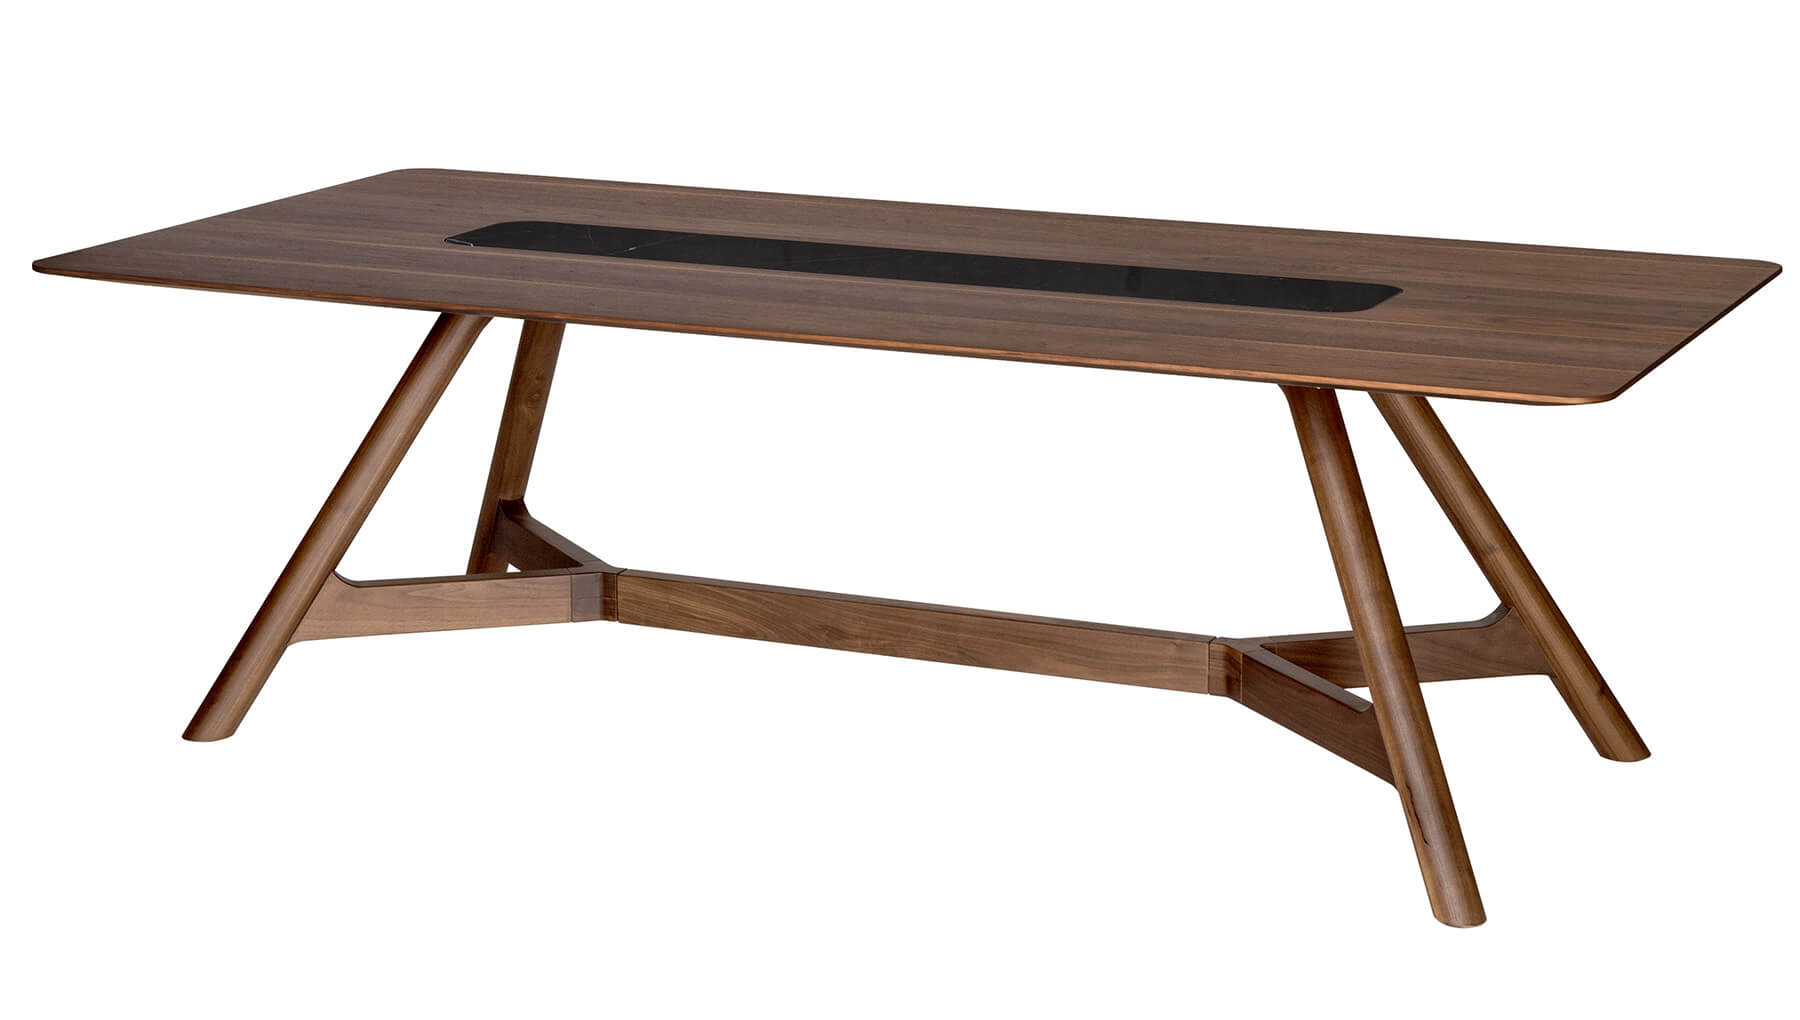 Kahal a wcer 001 dining table in walnut and ceramic stripe in the middle of the top